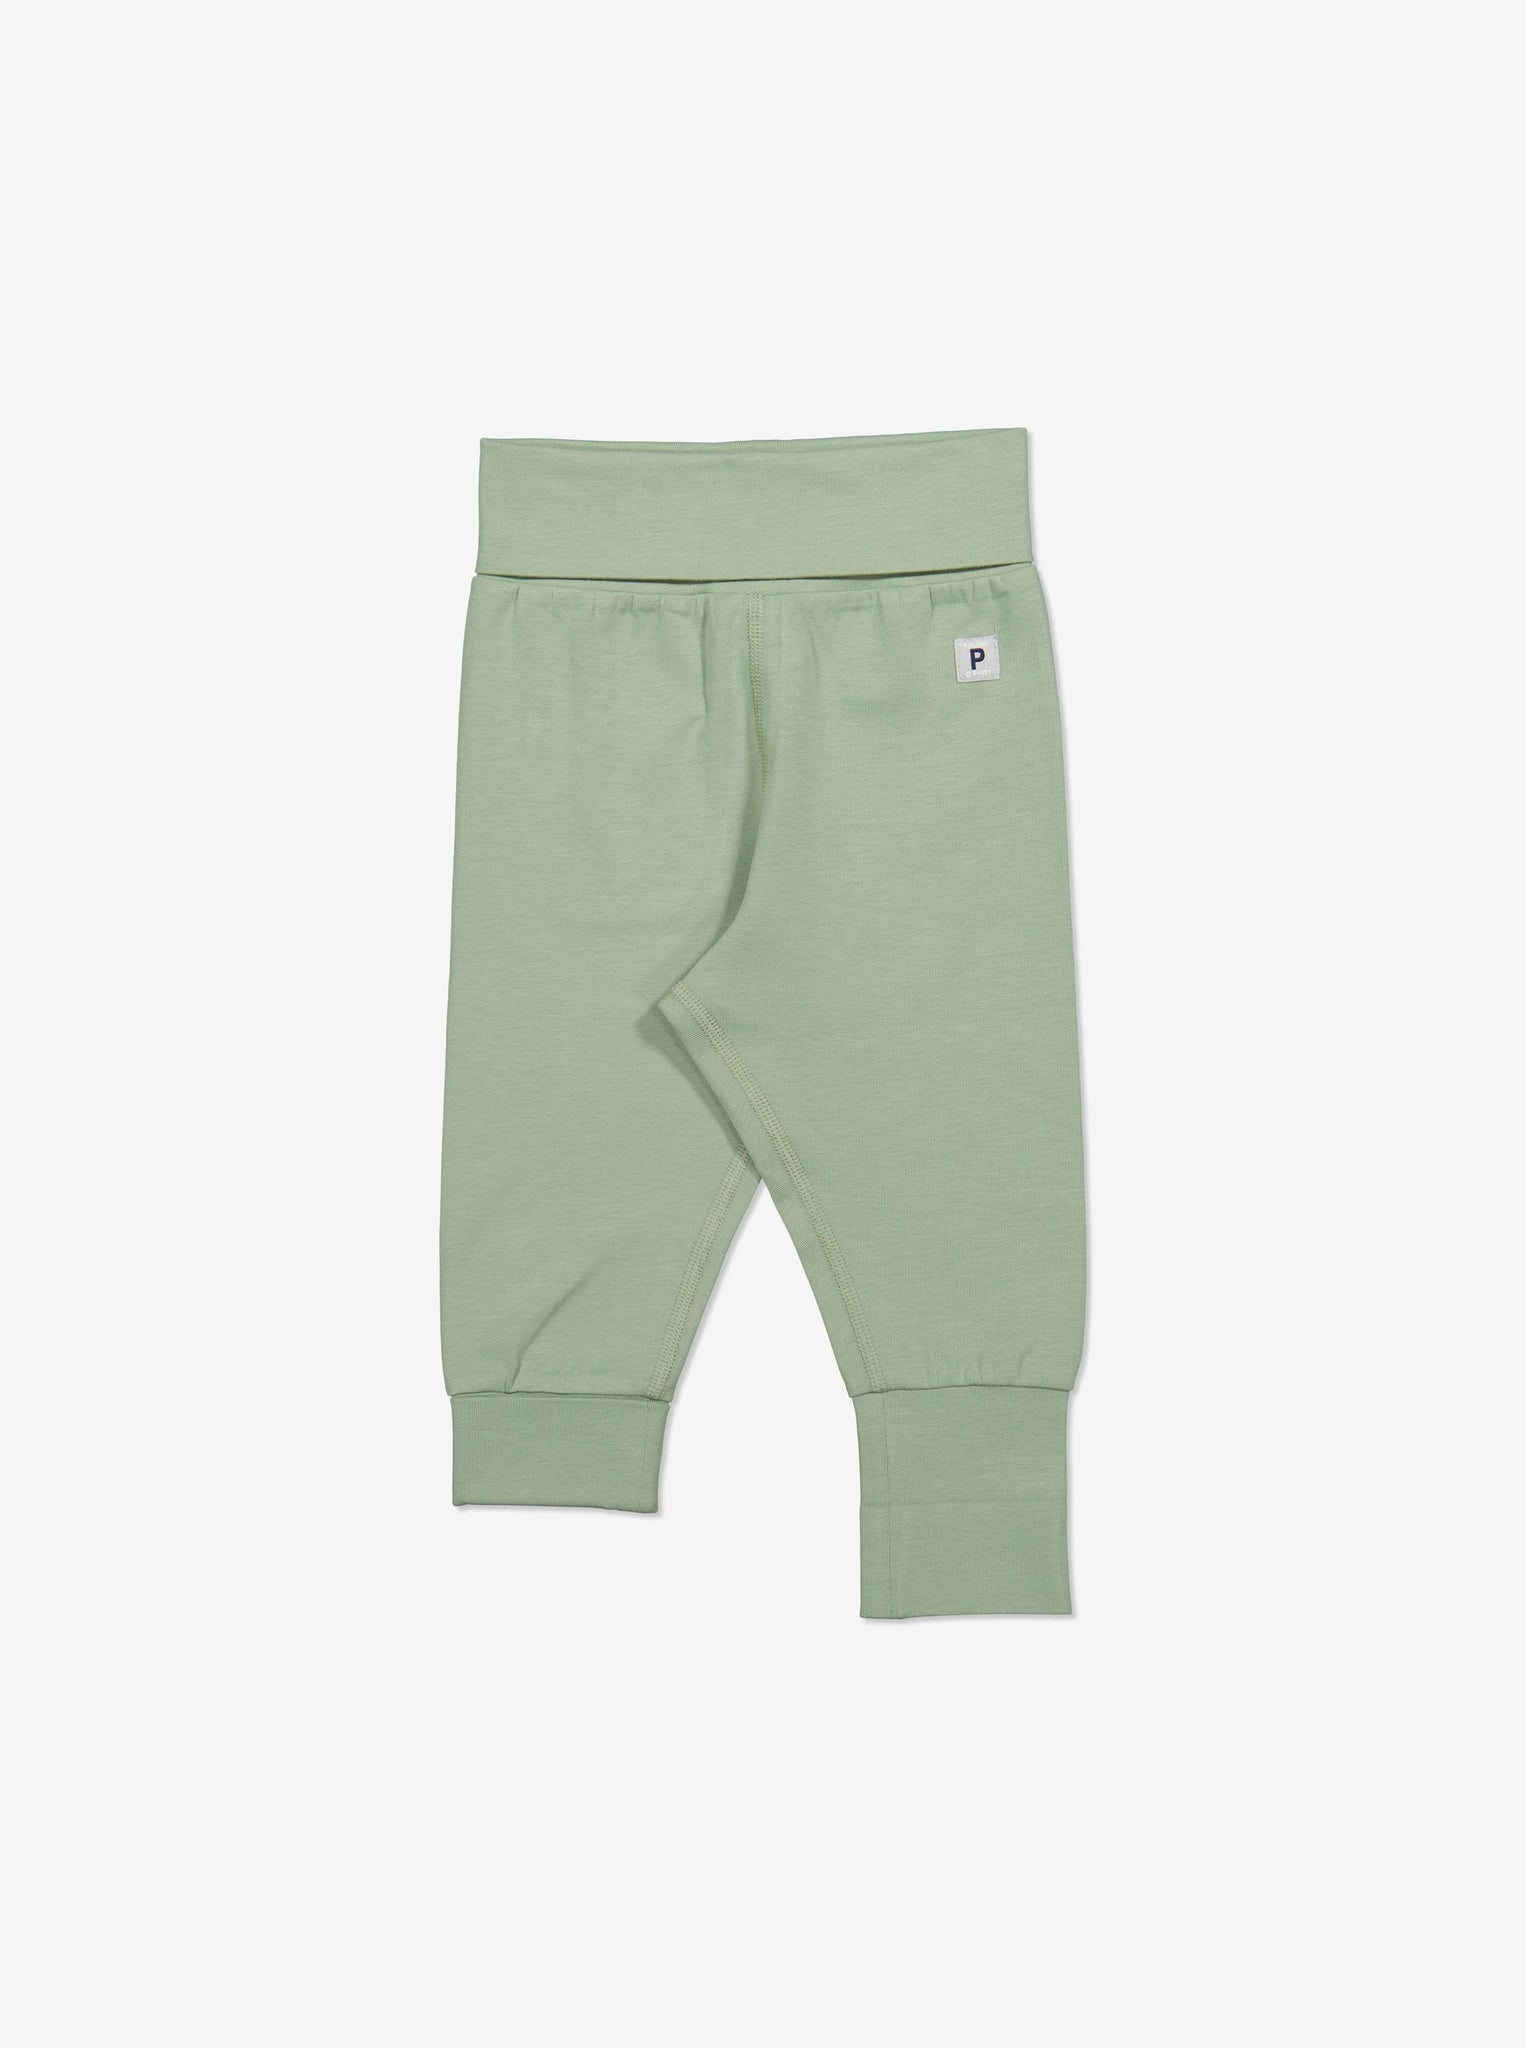  Organic Green Baby Leggings from Polarn O. Pyret Kidswear. Made from environmentally friendly materials.